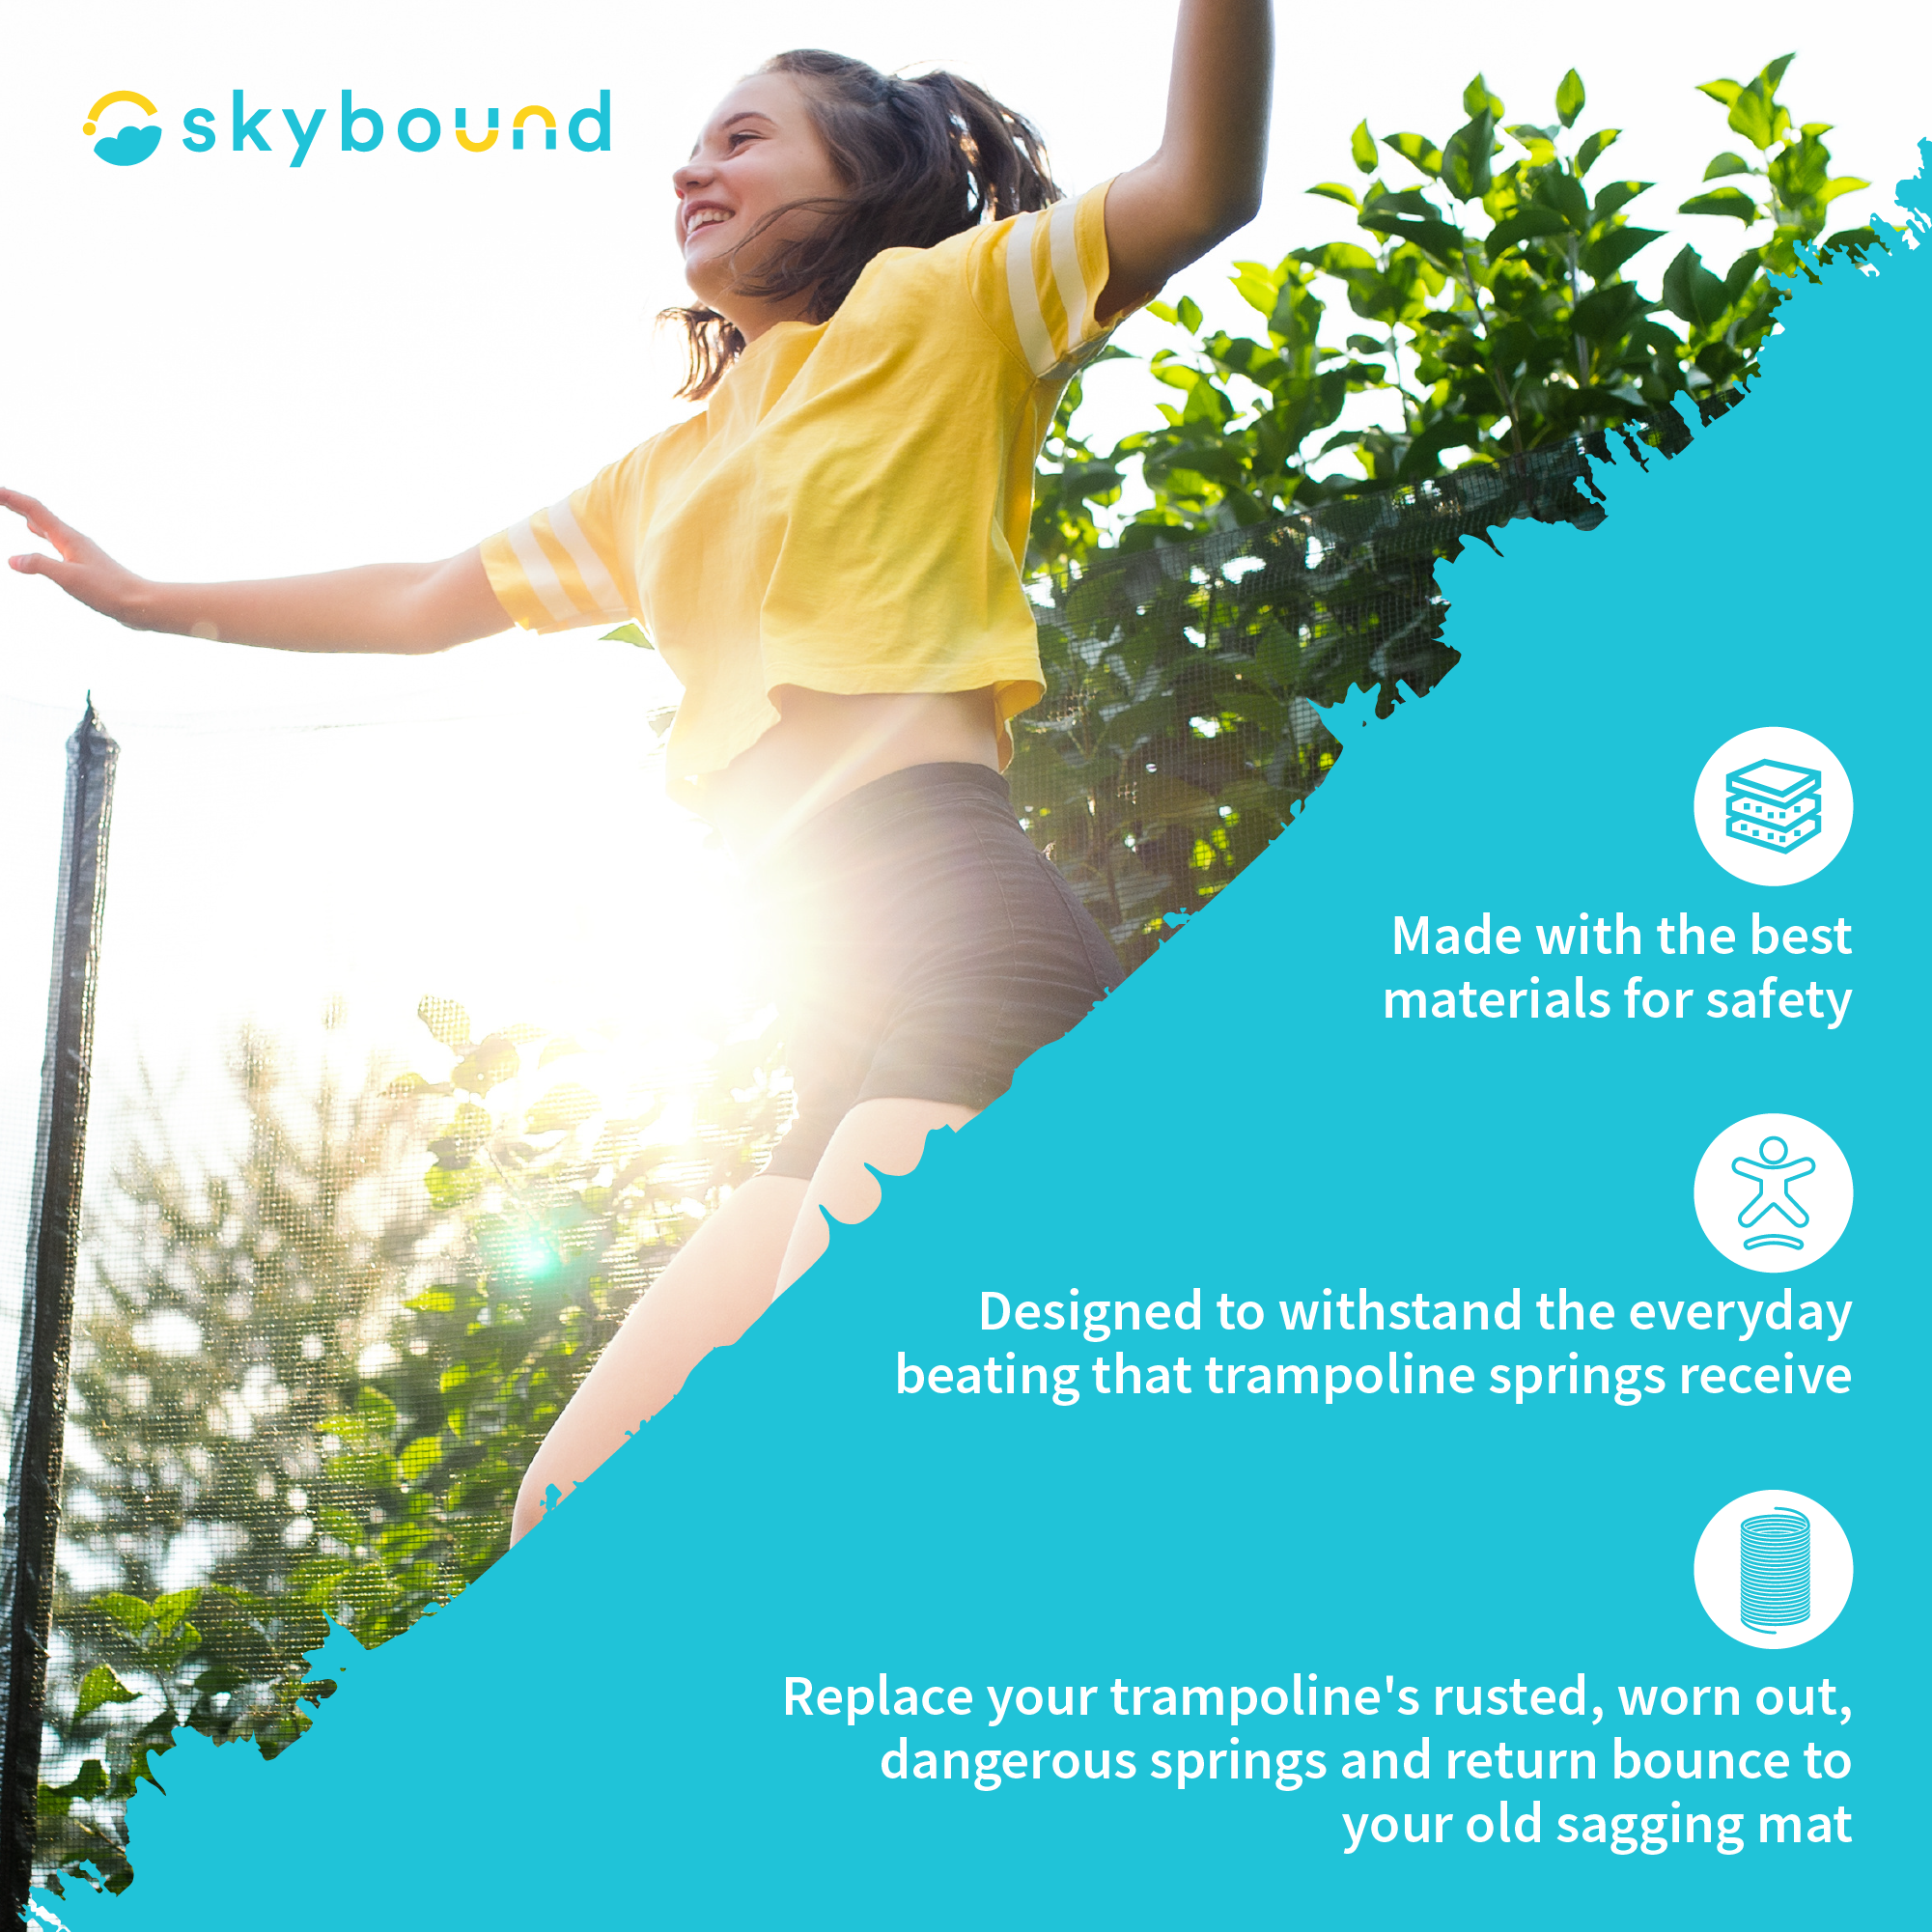 SkyBound:  Made with the best materials for safety, Designed to withstand the everyday beating that trampoline springs receive, Replace your trampoline's rusted, worn out, dangerous springs and return bounce to your old sagging mat.  